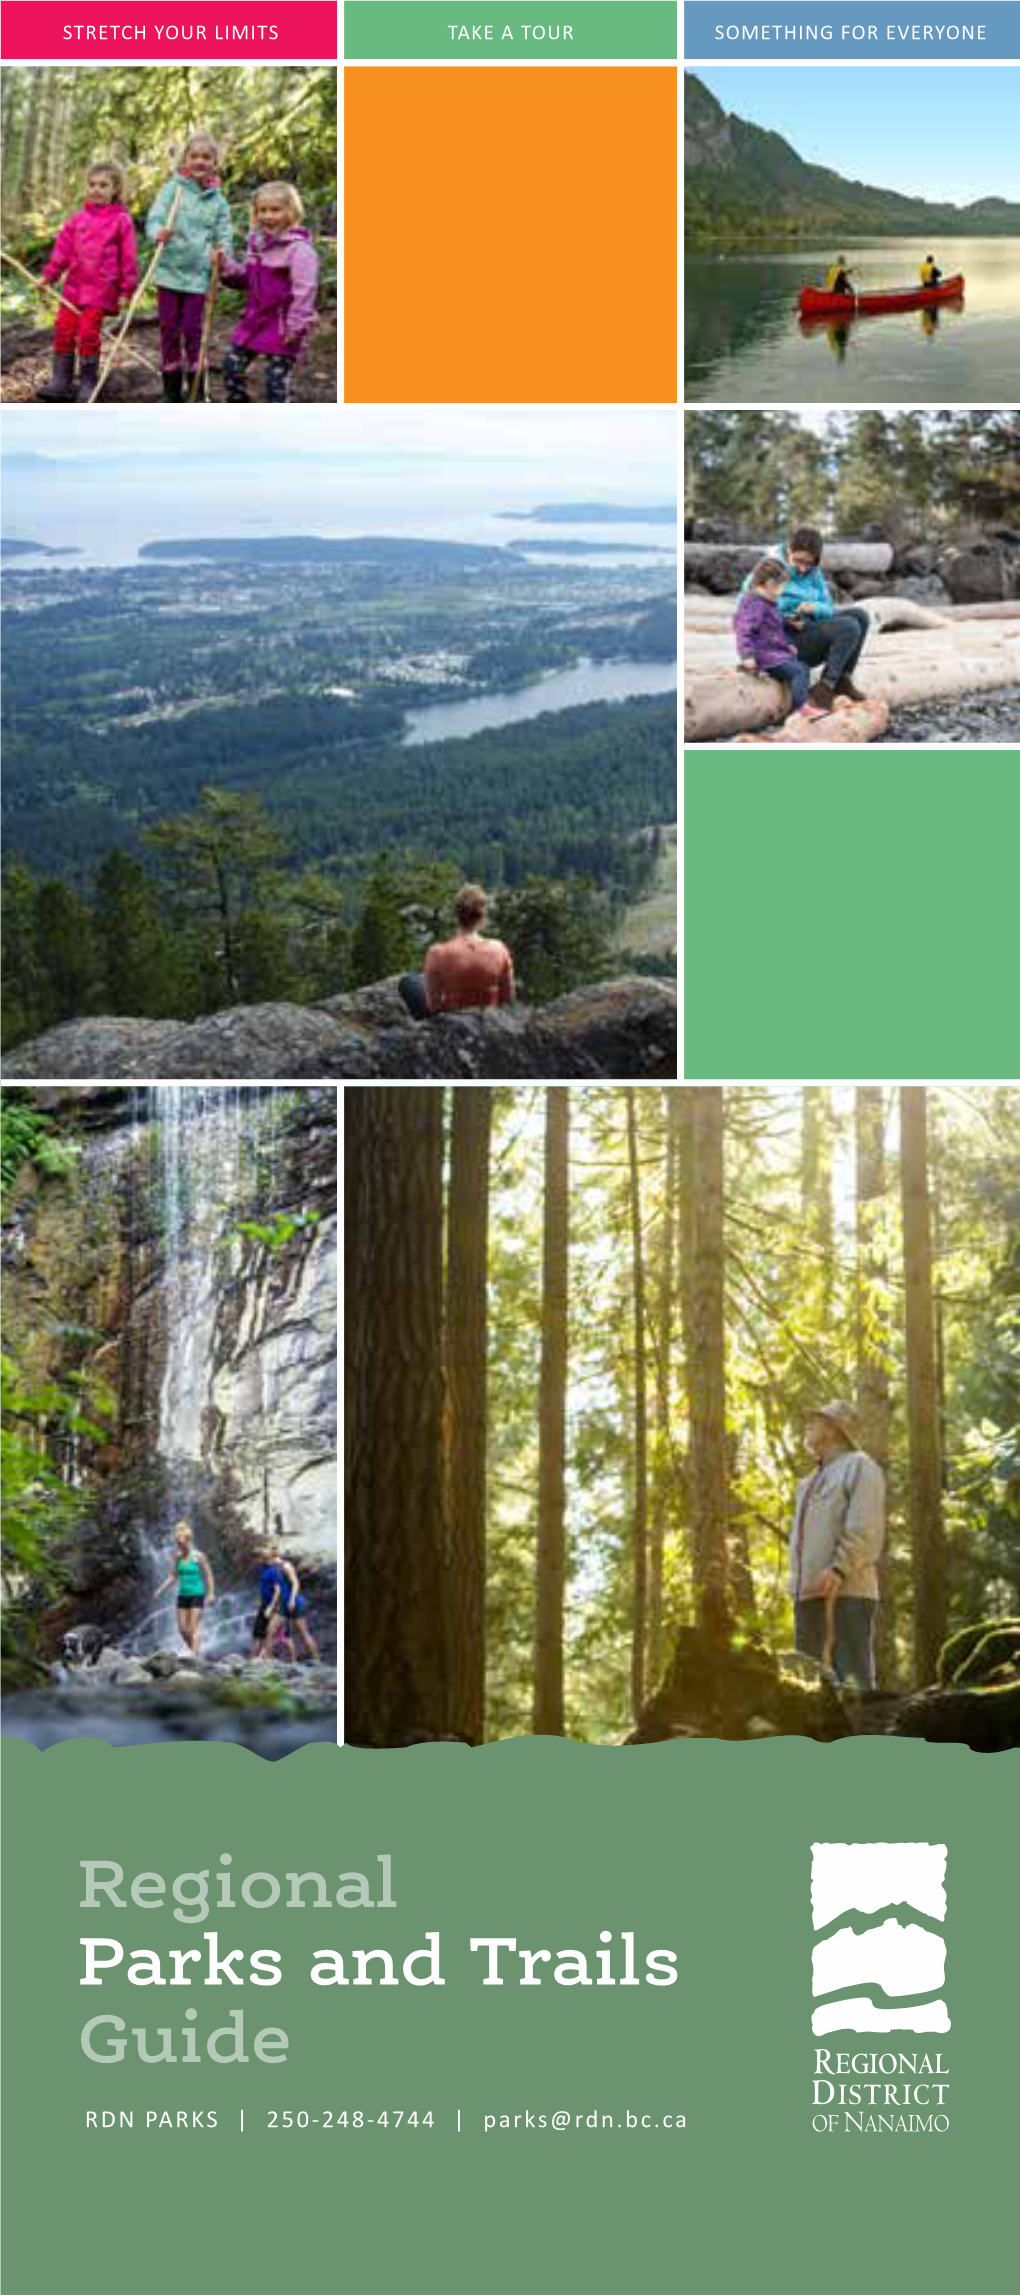 Regional Parks and Trails Guide